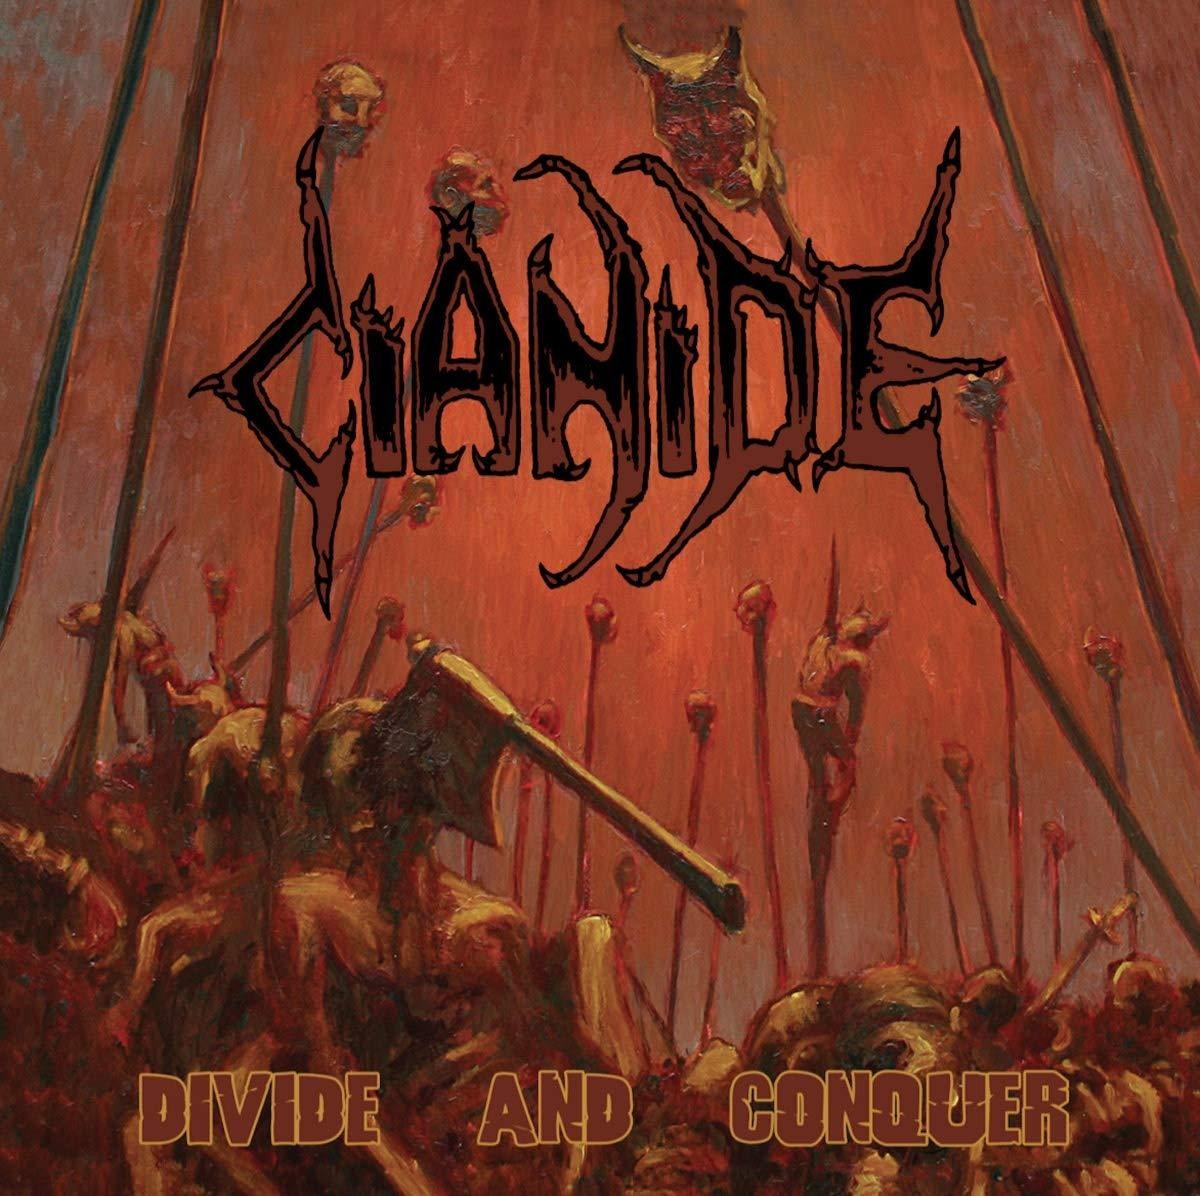 Cianide - Divide And Conquer-20th Anniversary